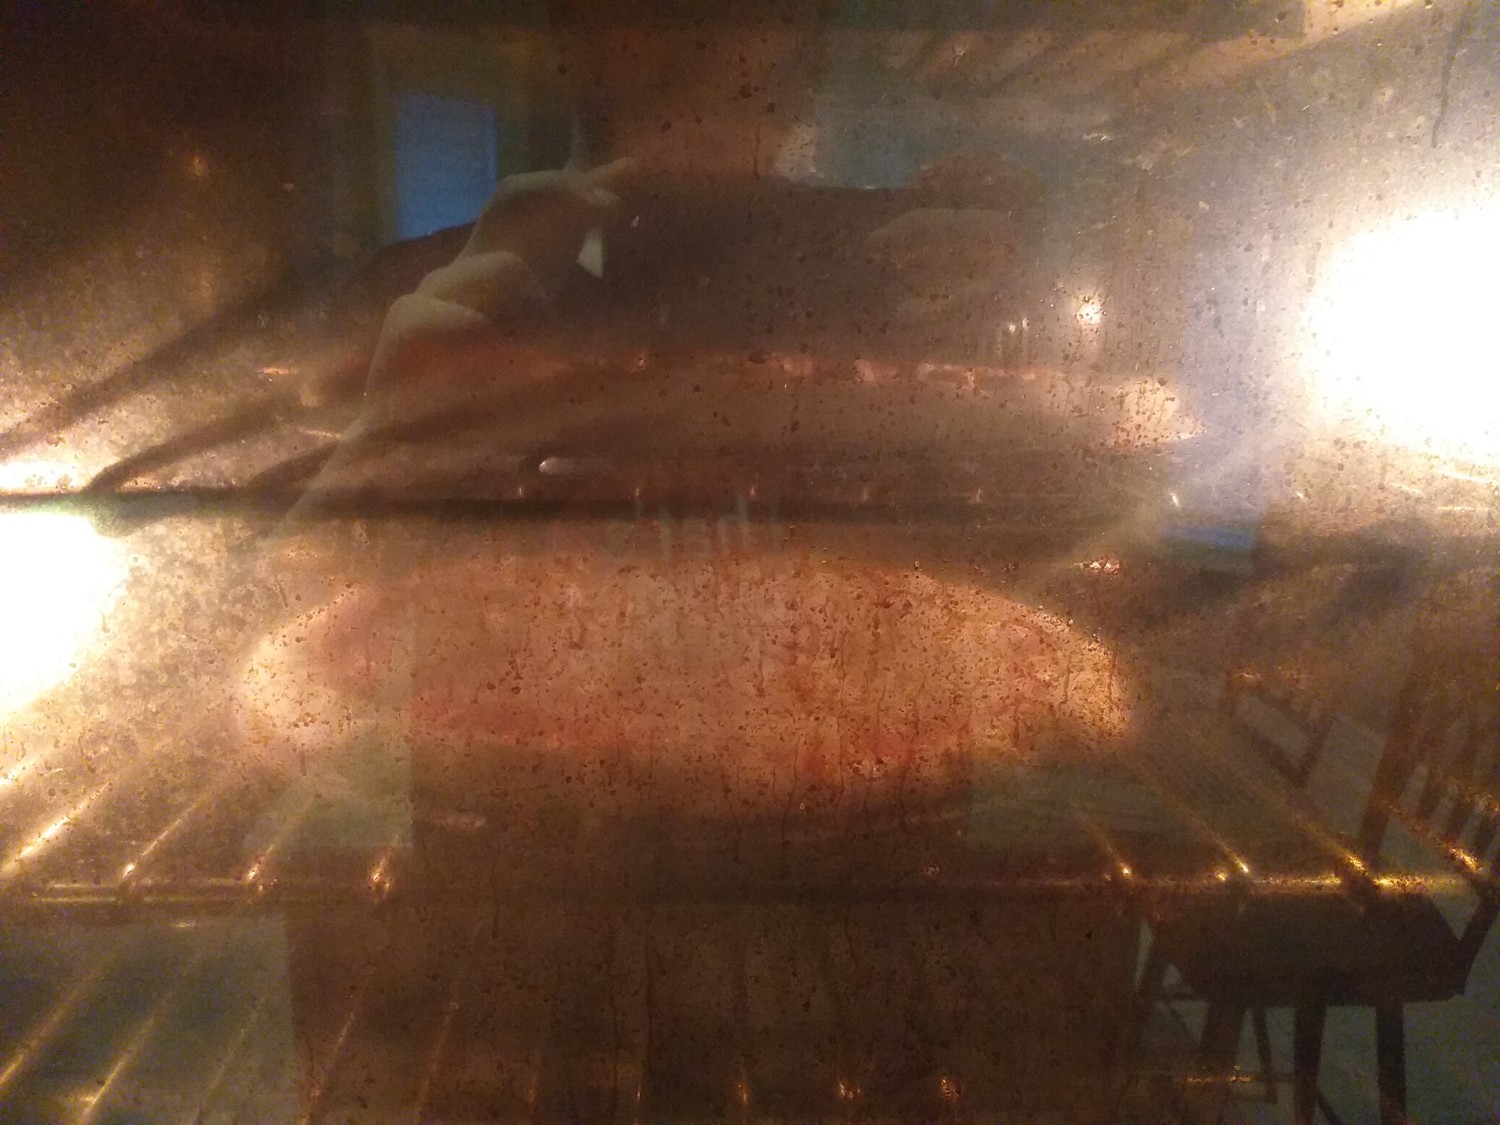 Pizza in Oven